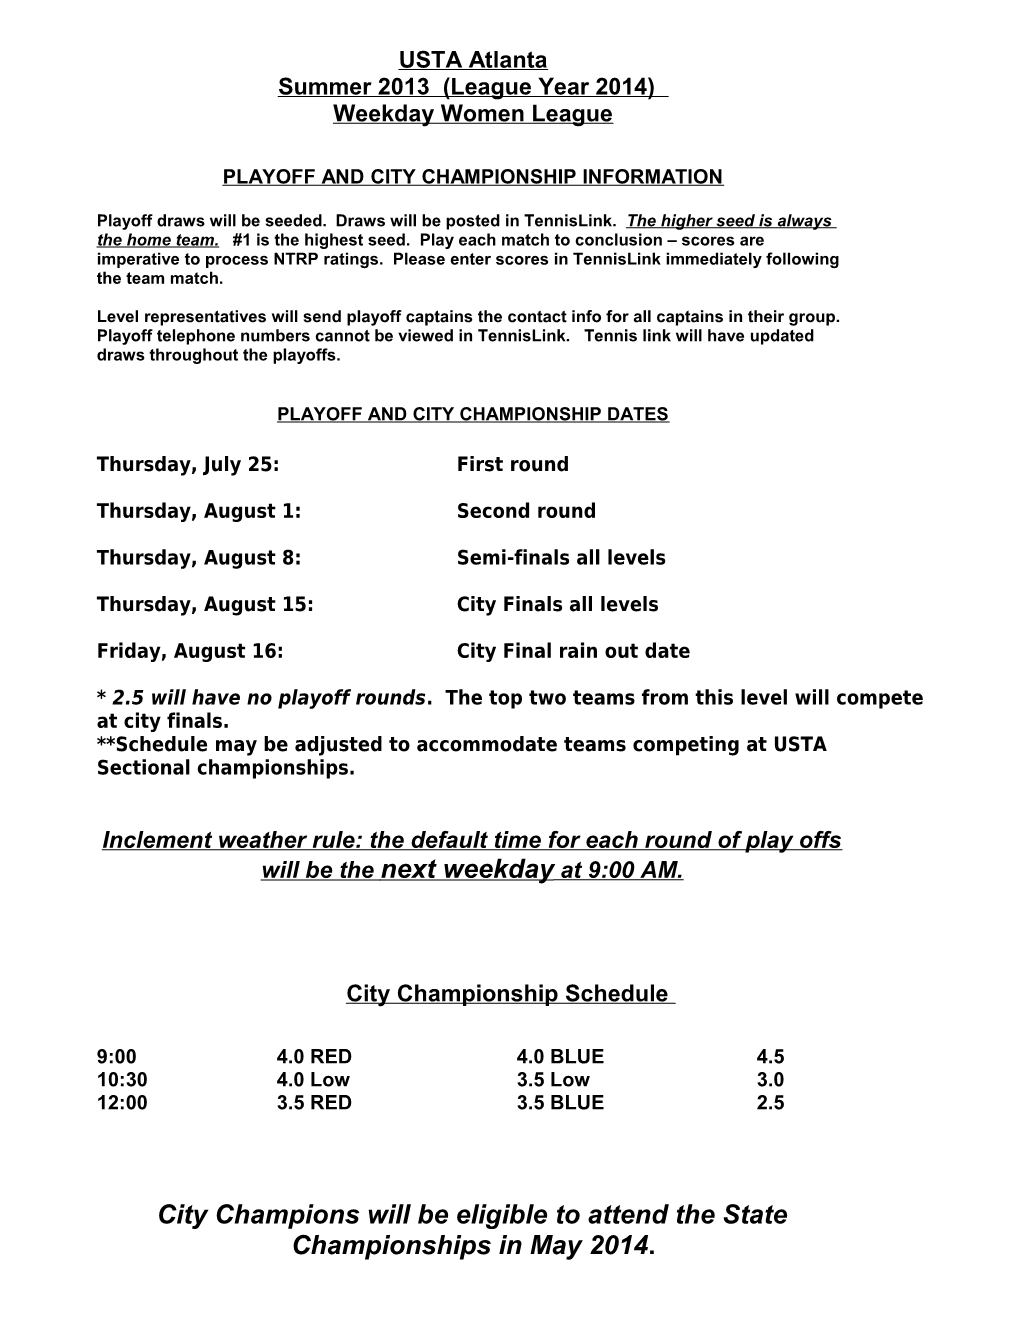 Playoff and City Championship Information